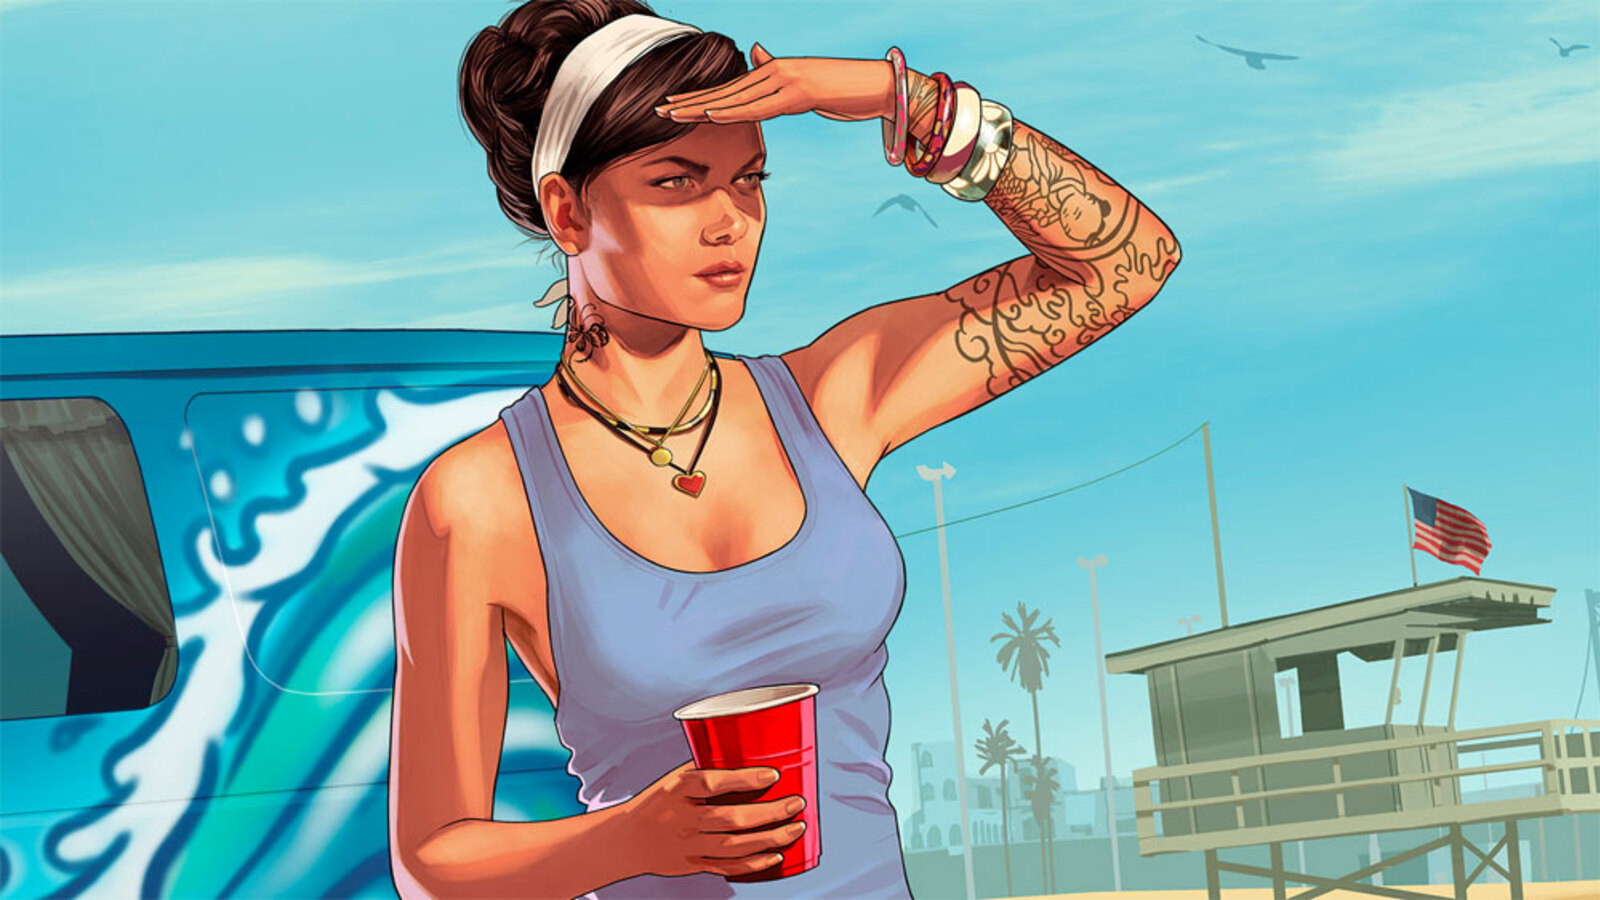 Grand Theft Auto 6 will reportedly feature the series’ first
female protagonist